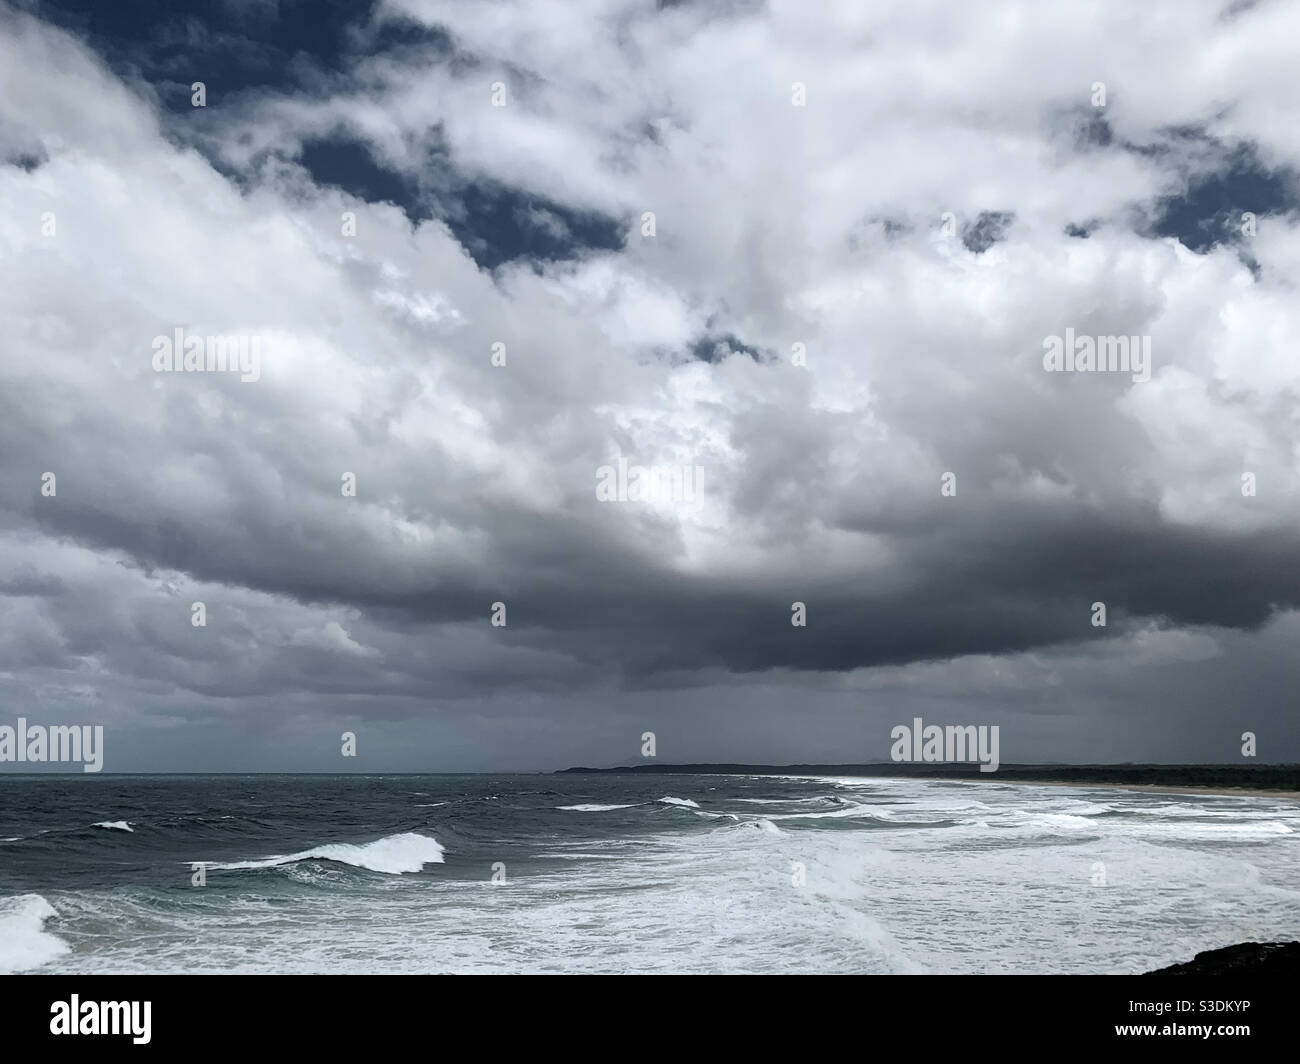 Stormy weather. Looming. Low down on the storm clouds over the frothy white ocean waves, NSW Australia Stock Photo